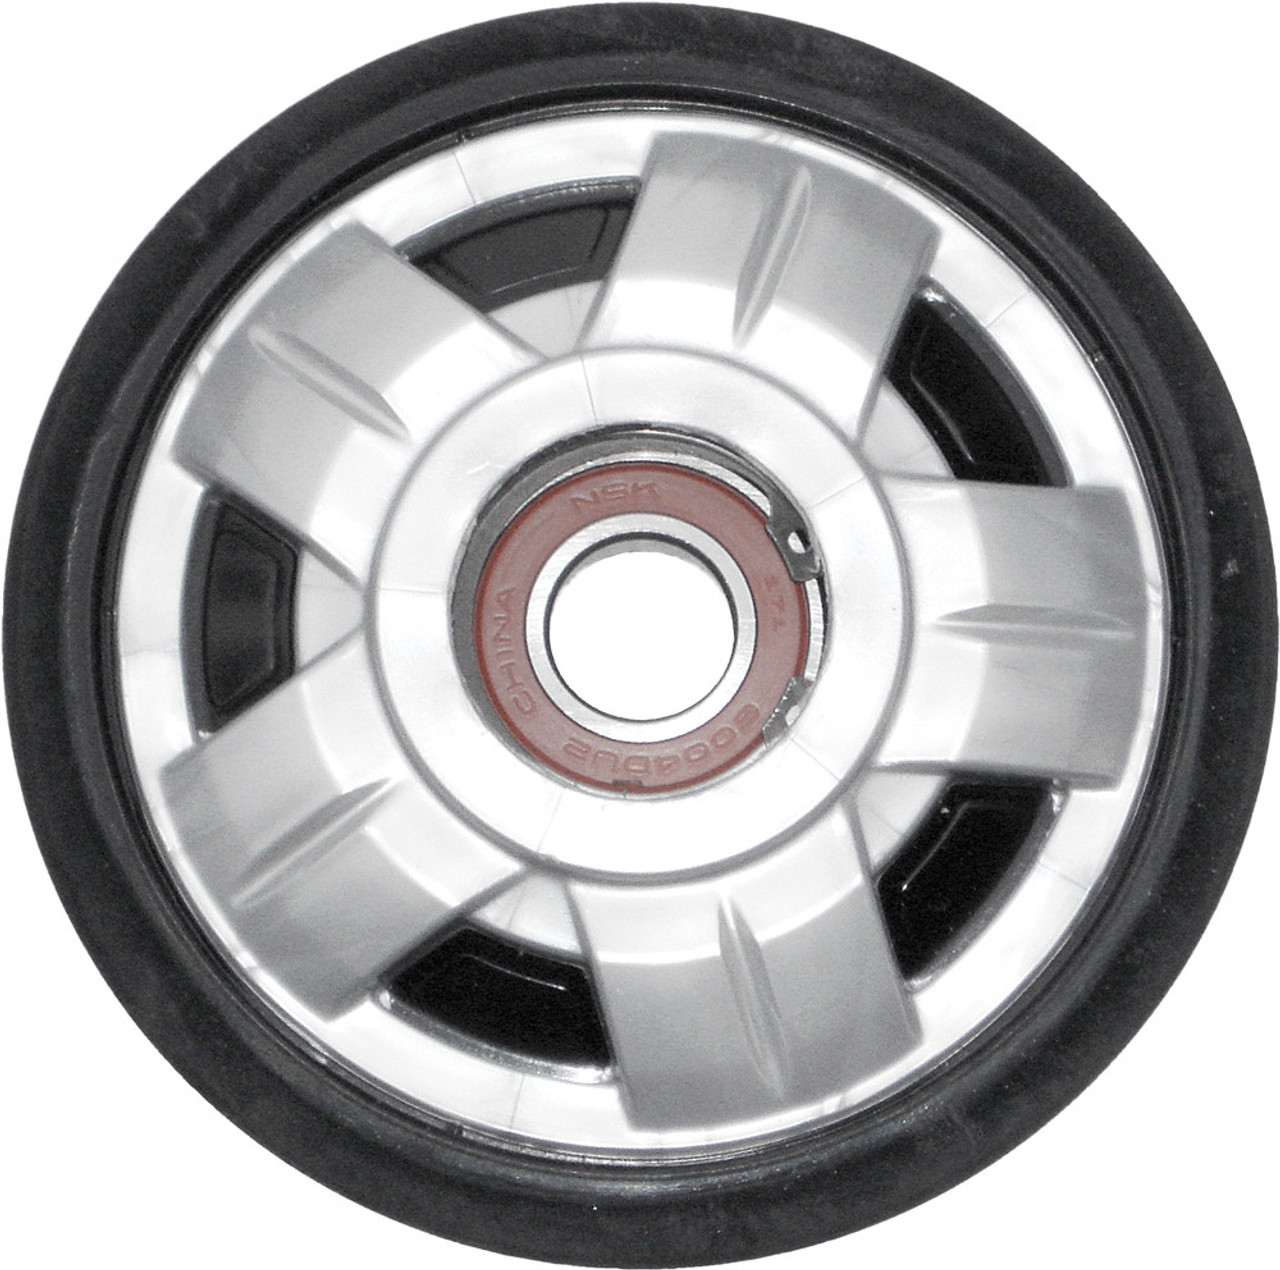 Idler Wheel compatible with Ski Doo - Silver color, 180mm (7.09”) x 20mm Part# 541-5090 OEM# 503190752